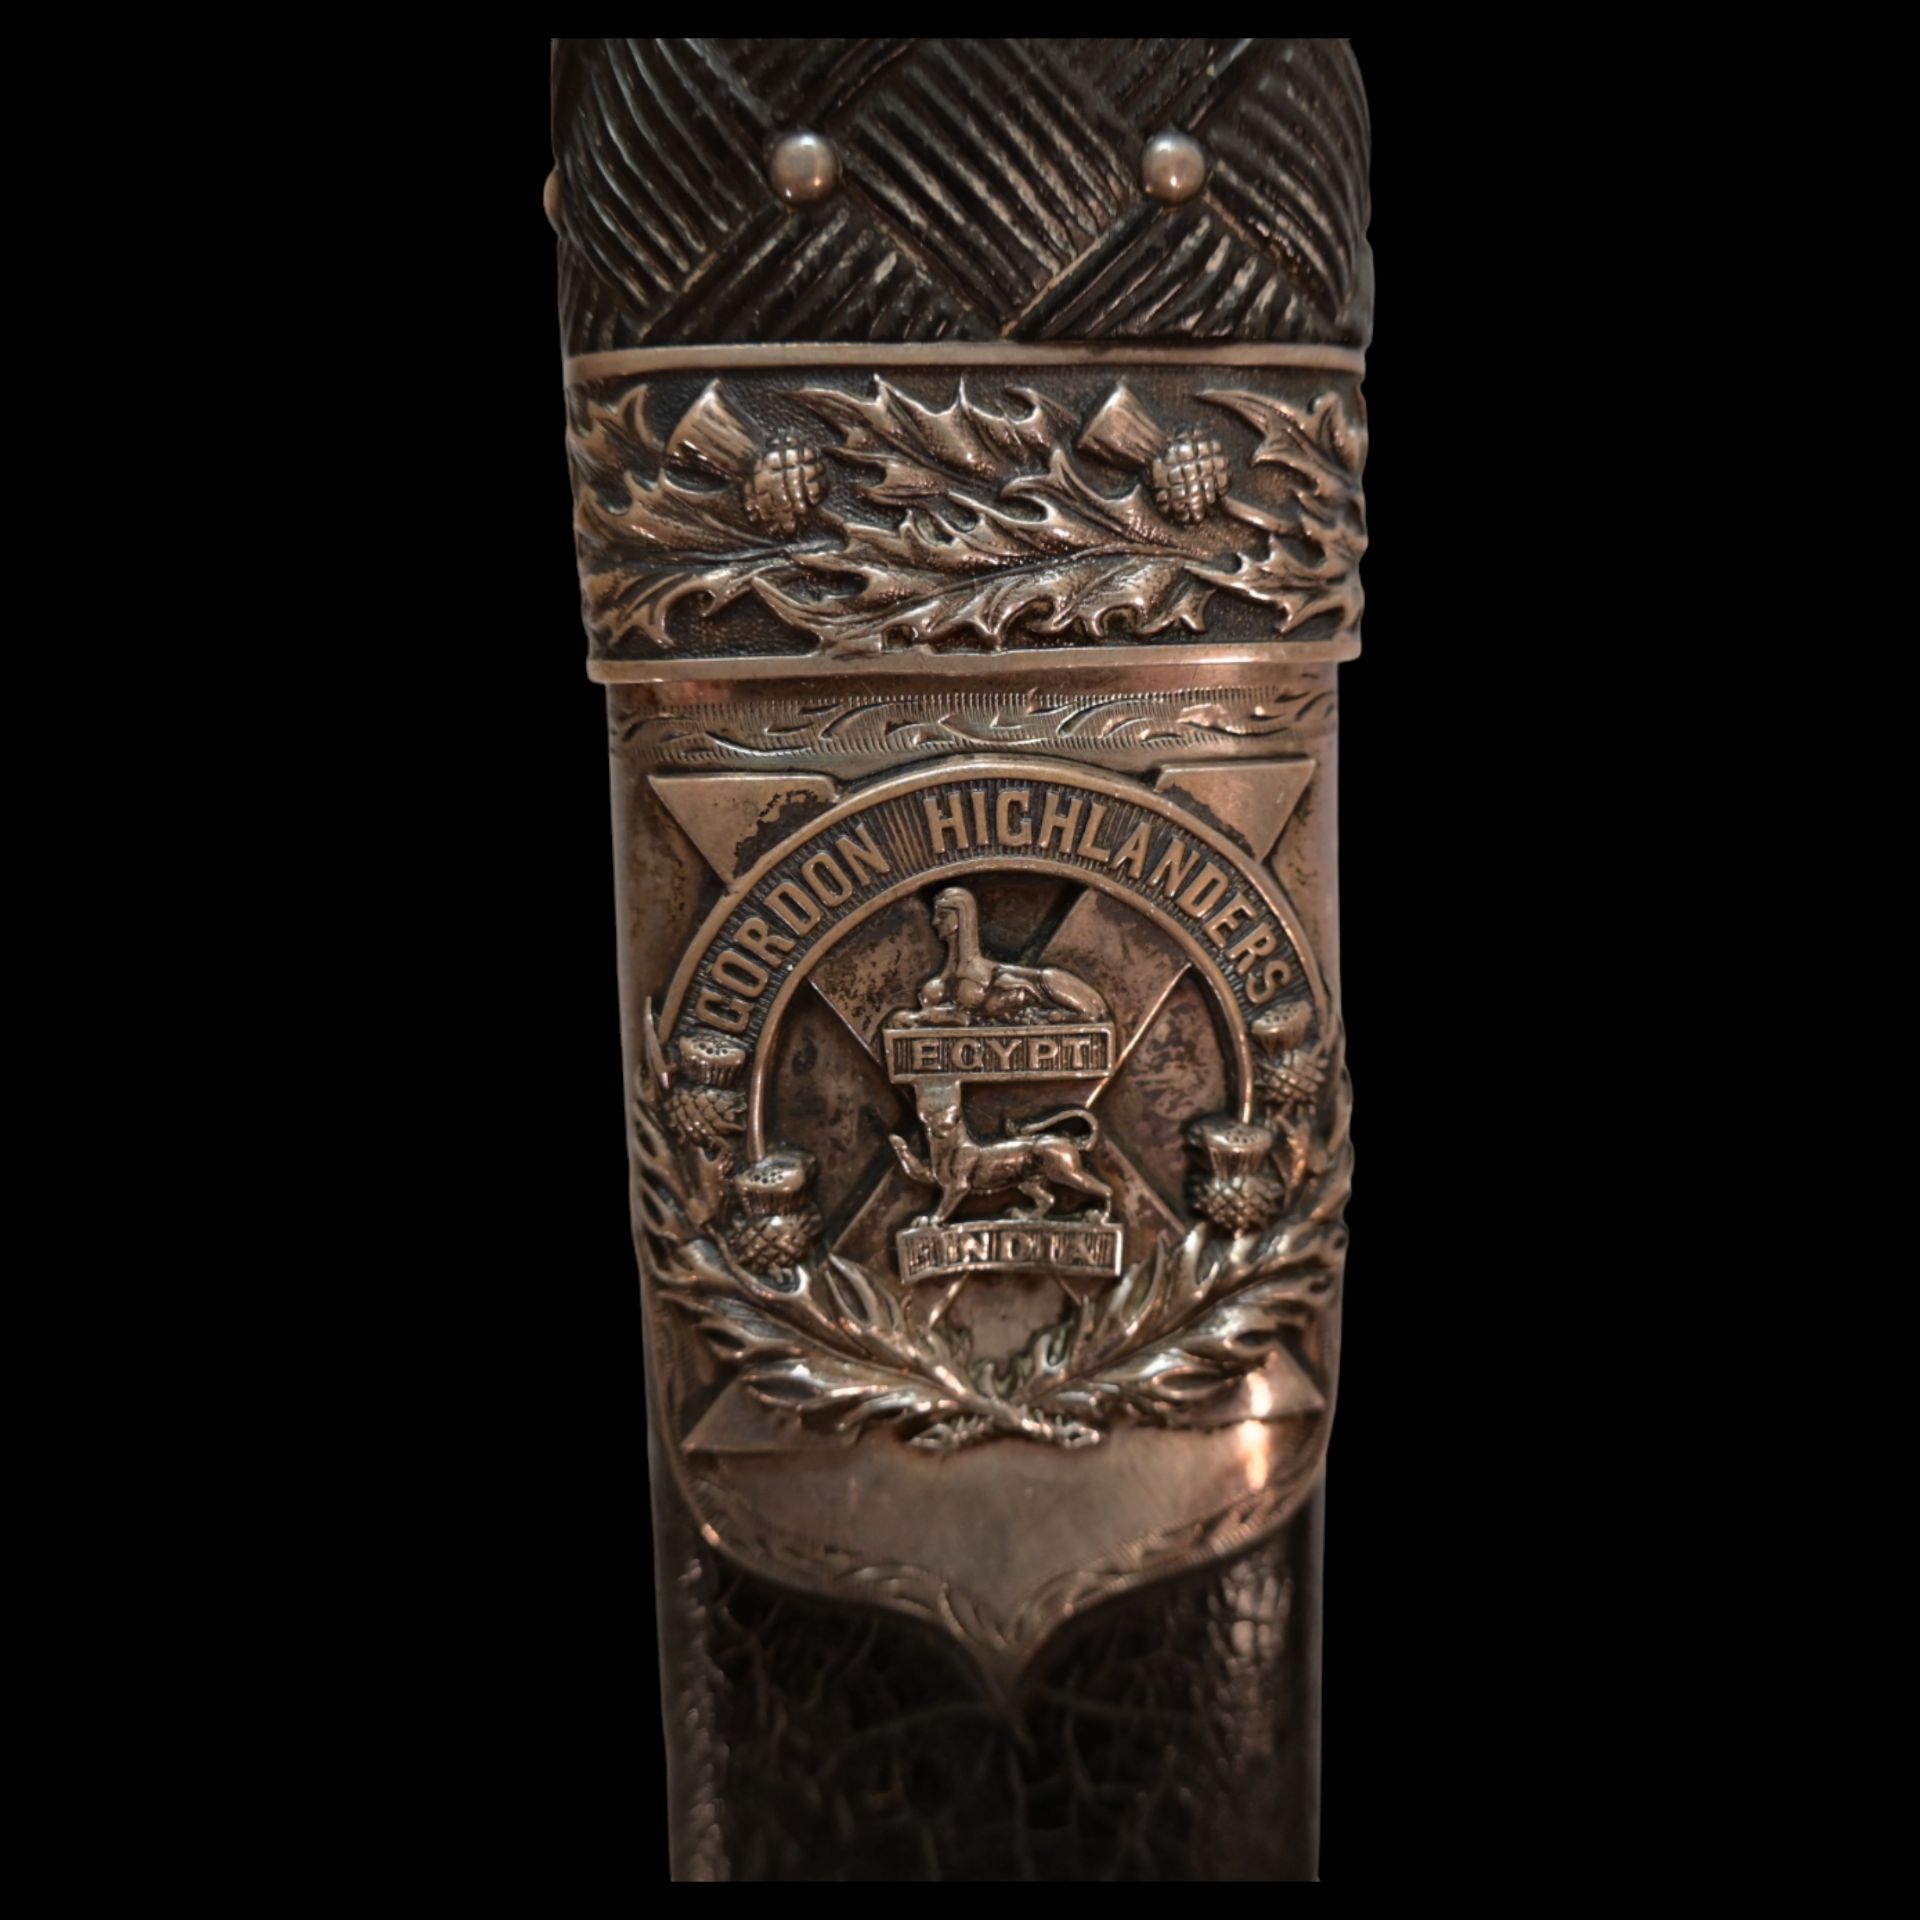 LATE VICTORIAN SILVER MOUNTED SCOTTISH OFFICERS DIRK, GORDON HIGHLANDERS, LATE 19TH CENTURY. - Image 18 of 26